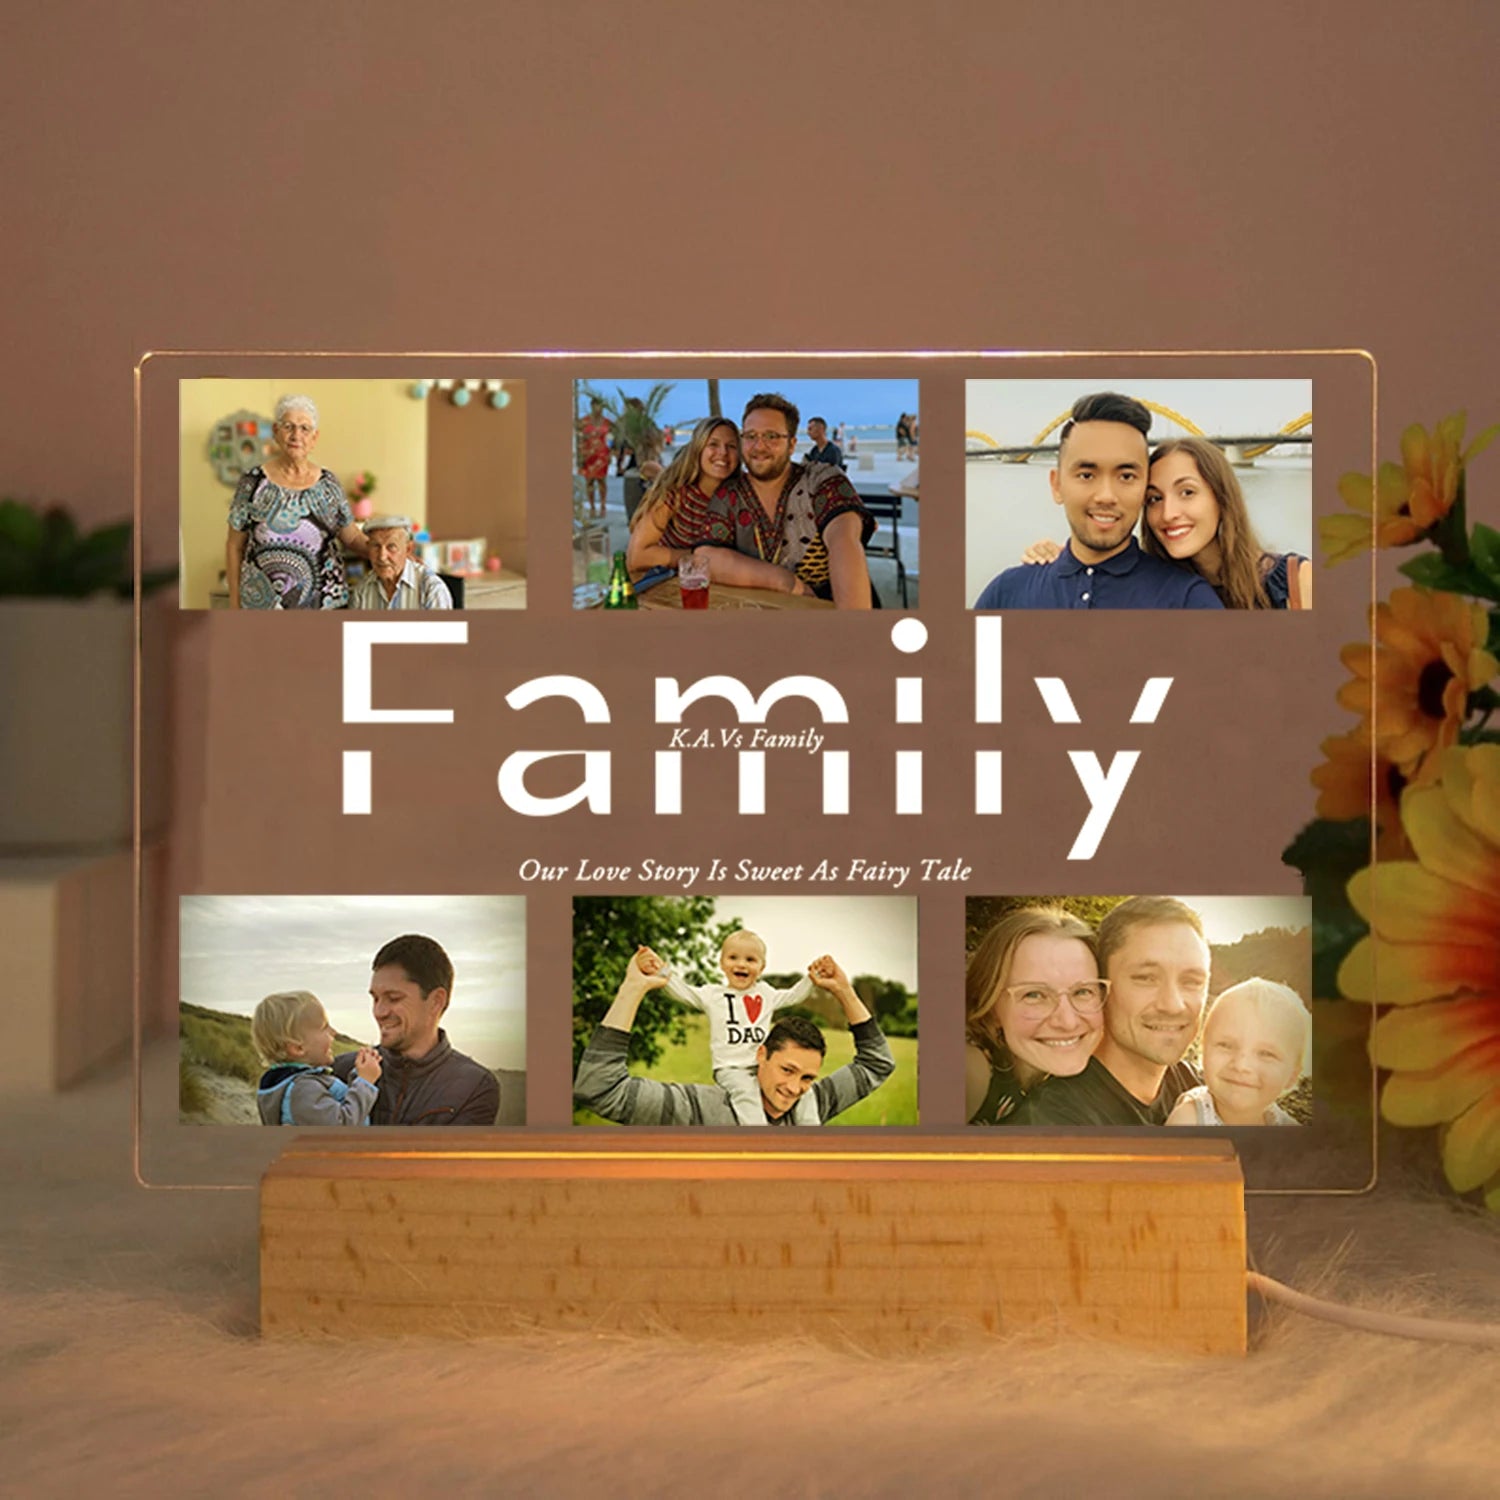 Personalized Custom Photo Text 3D Acrylic Lamp - Customized Bedroom Night Light for MOM DAD LOVE Family Day Christmas Birthday Gift Warm Light / Family